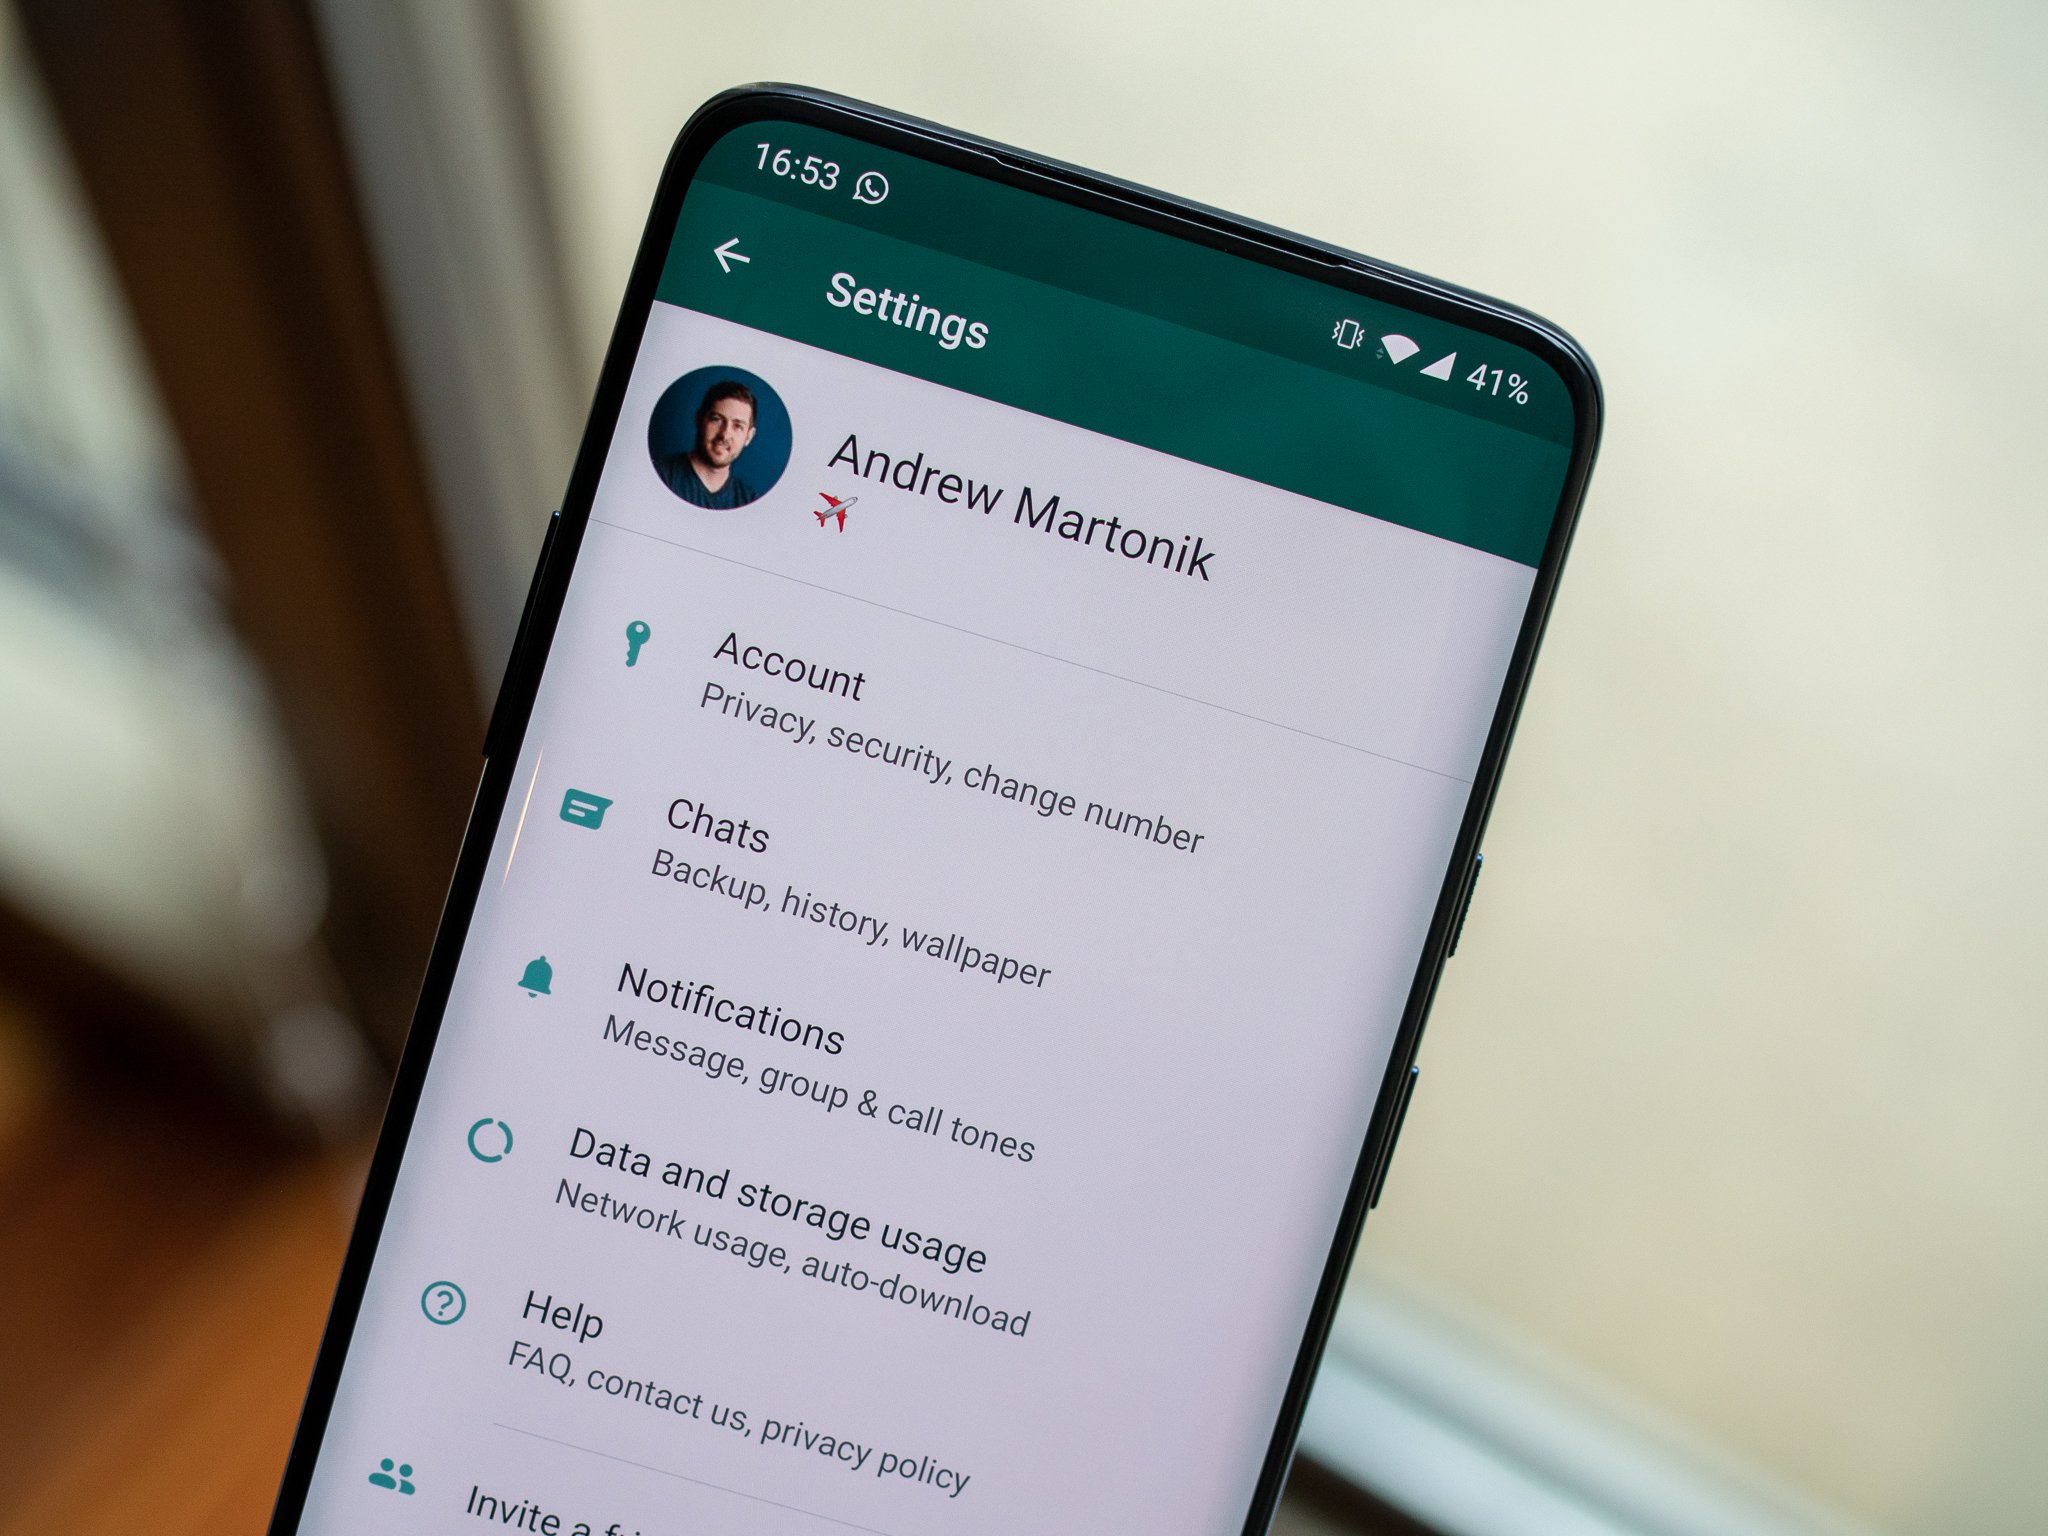 WhatsApp service returns after over an hour of worldwide outages